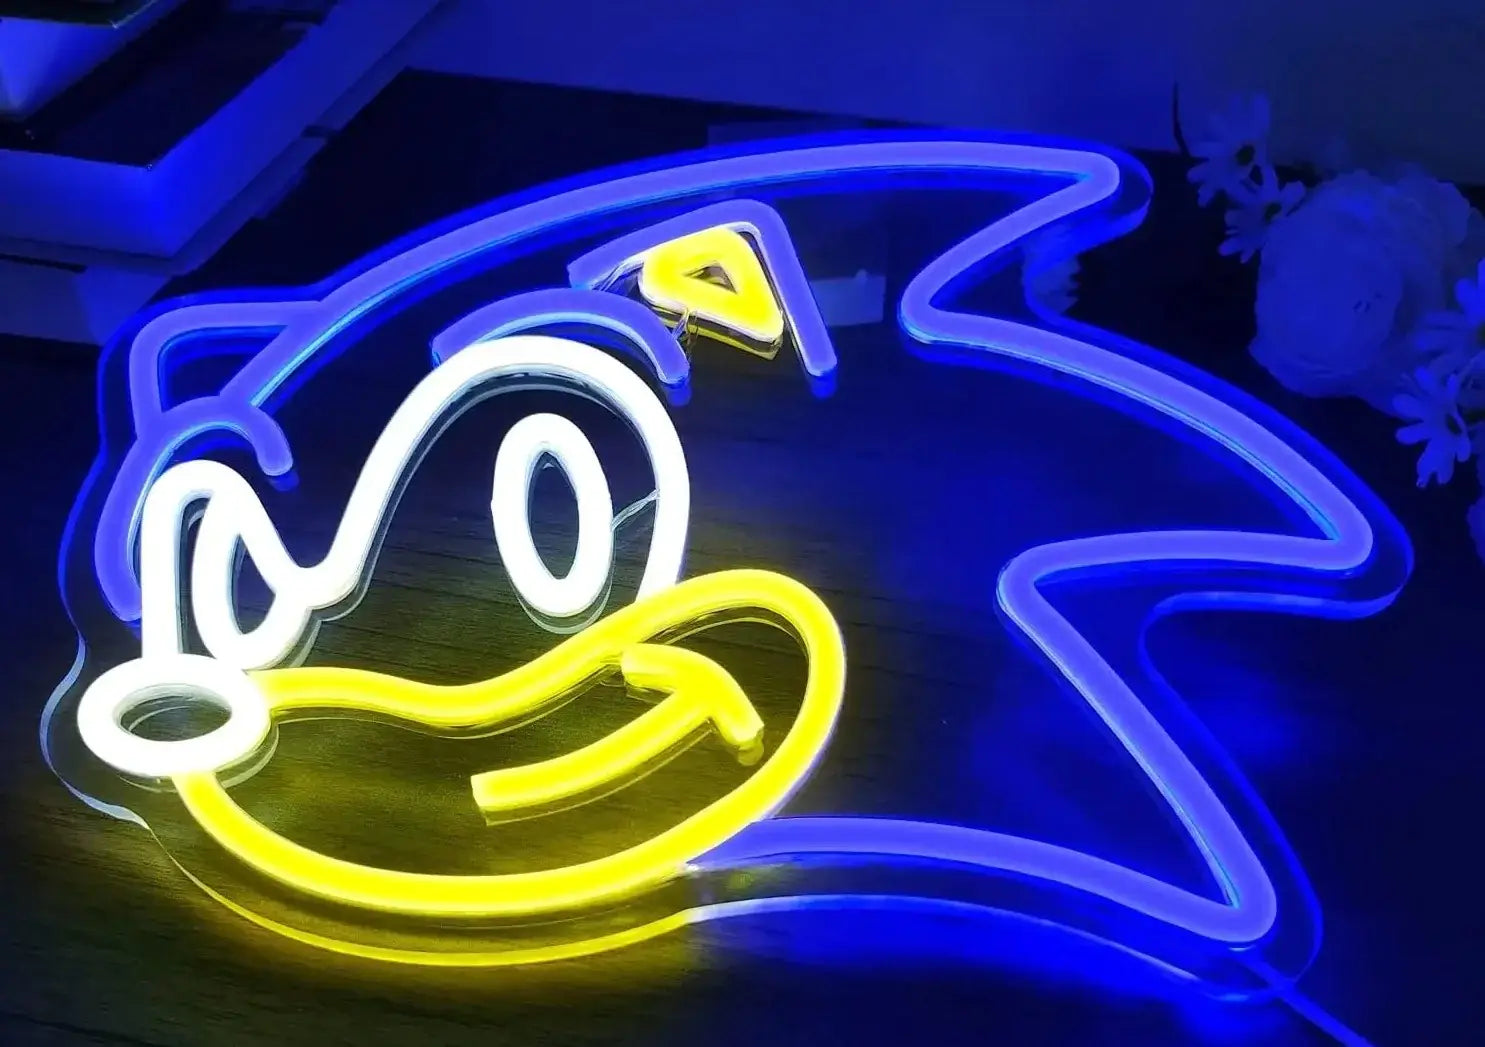 Sonic Blue Neon Sign